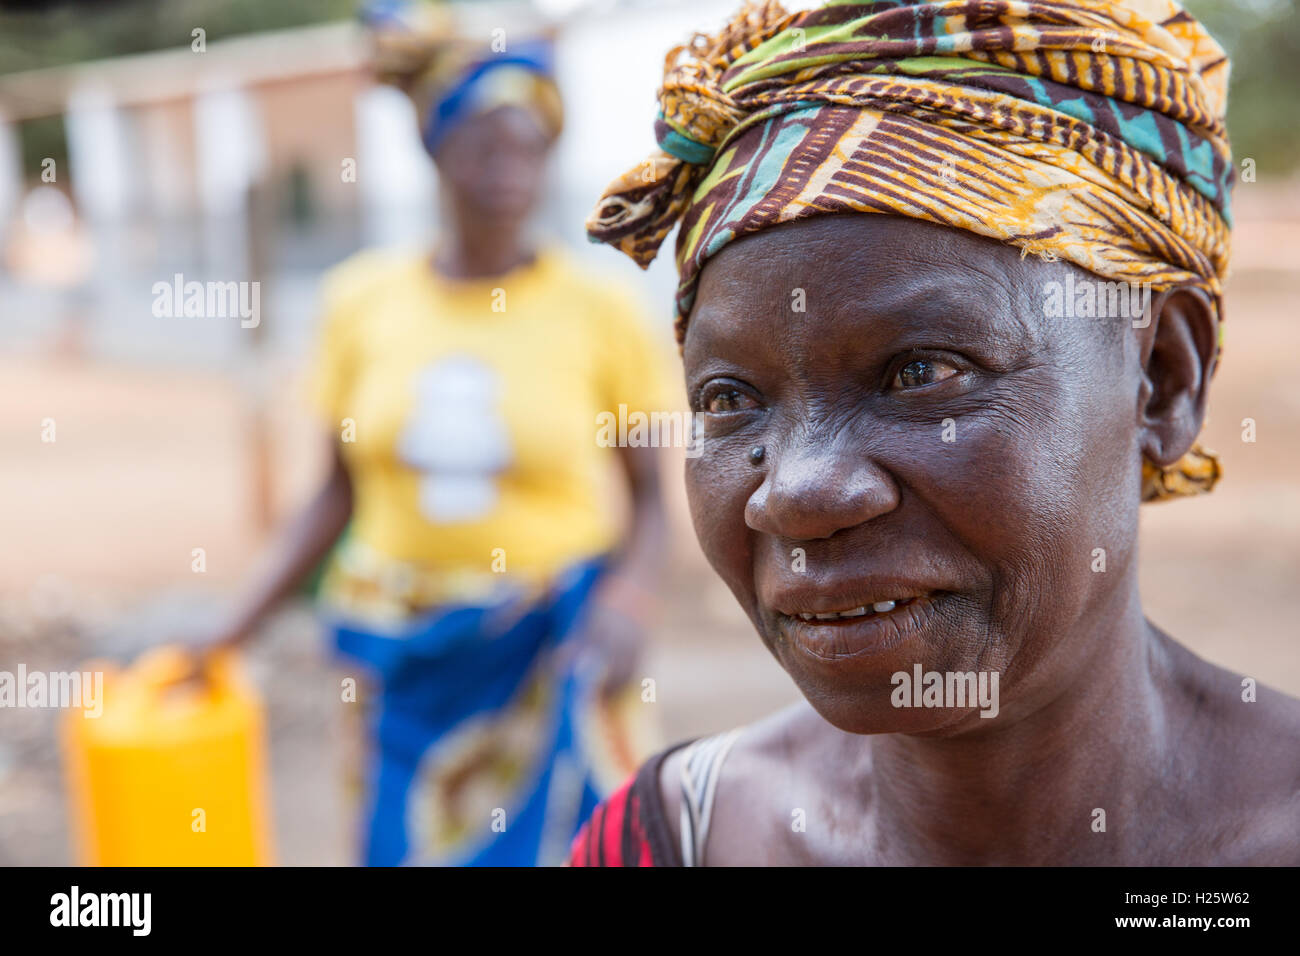 Ribaue Hospital, Ribaue,  Nampula Province, Mozambique, August 2015: Maria Albino now that she can see after her cataract operation the day before.  Photo by Mike Goldwater Stock Photo